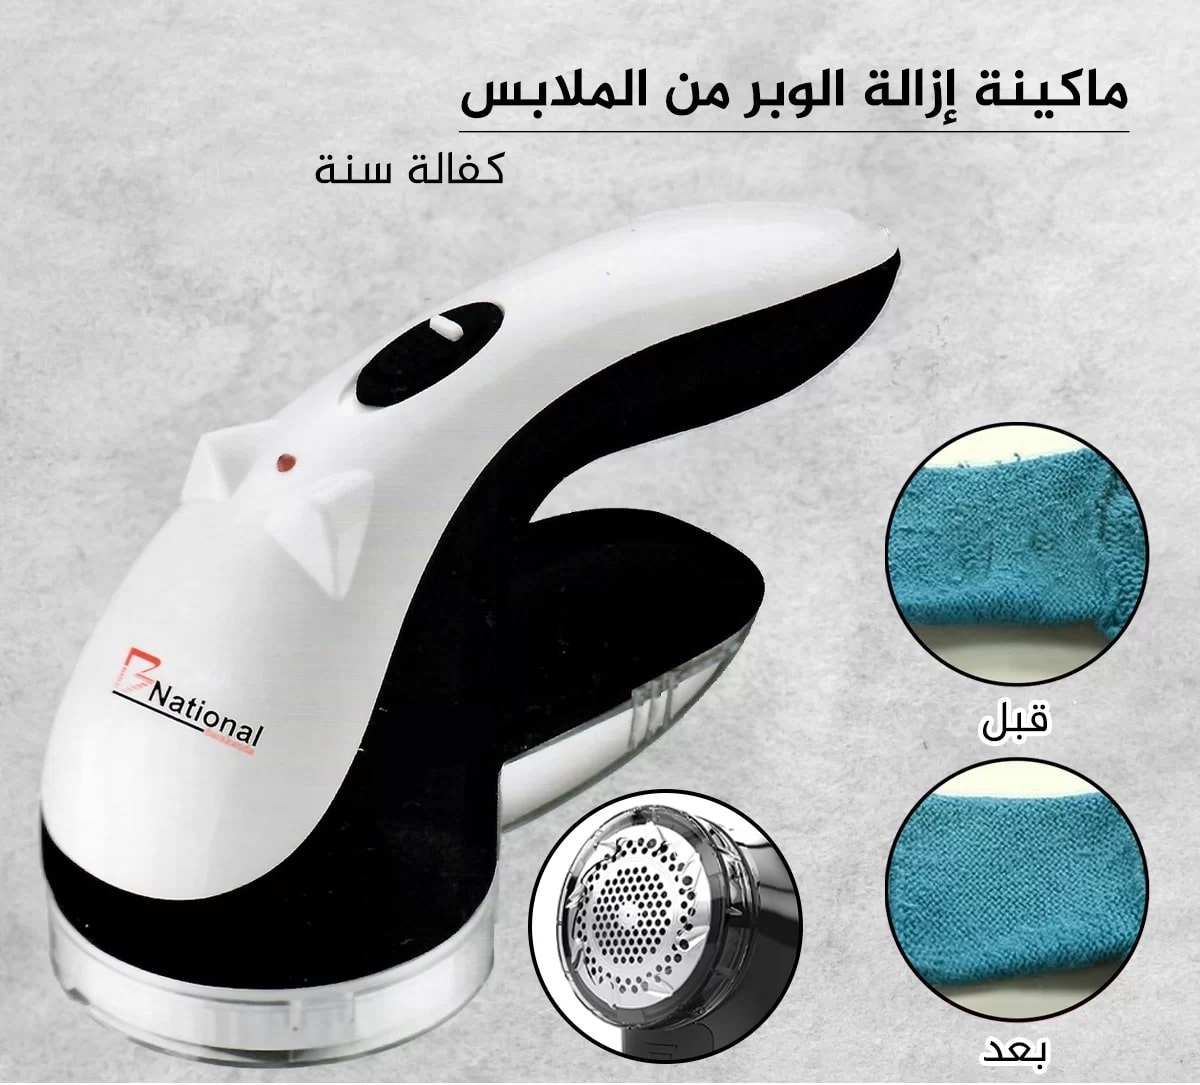 National lint removal machine from clothes